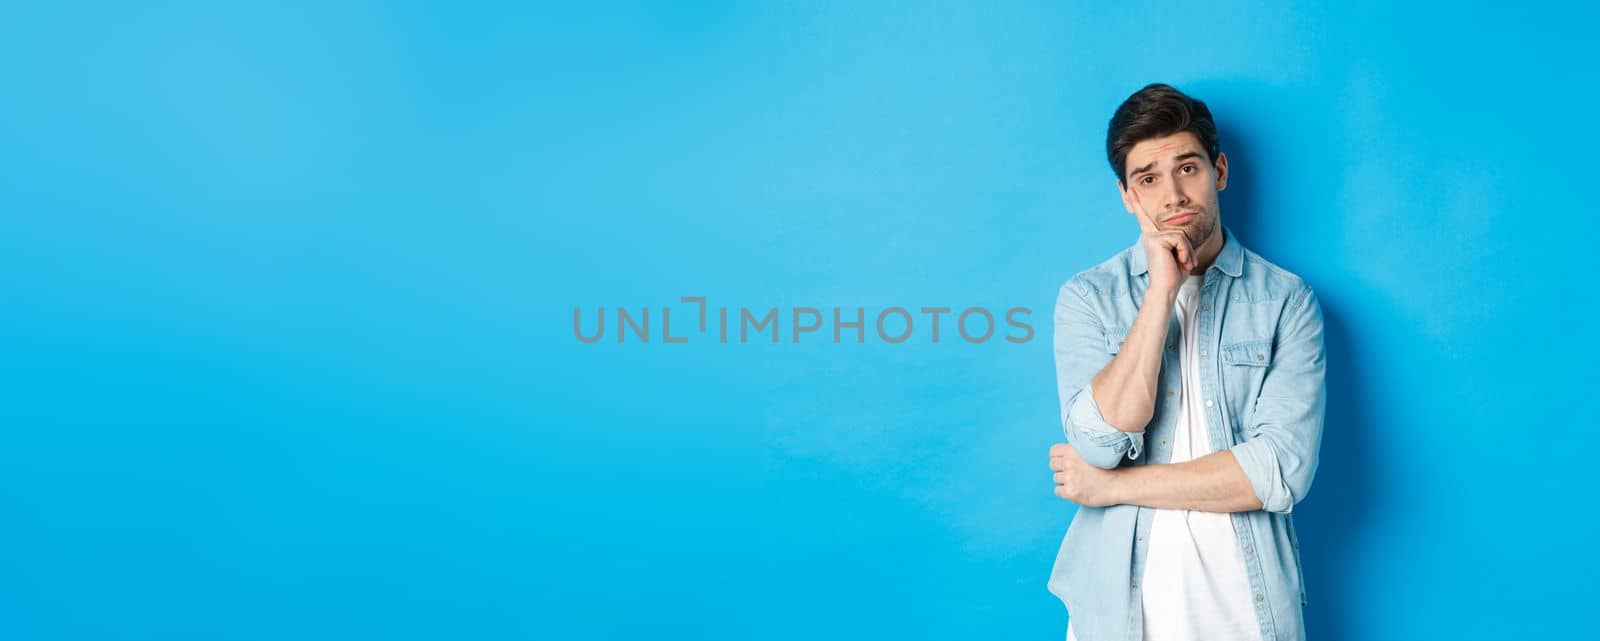 Unamused and bored man looking without interest at camera, standing against bllue background by Benzoix